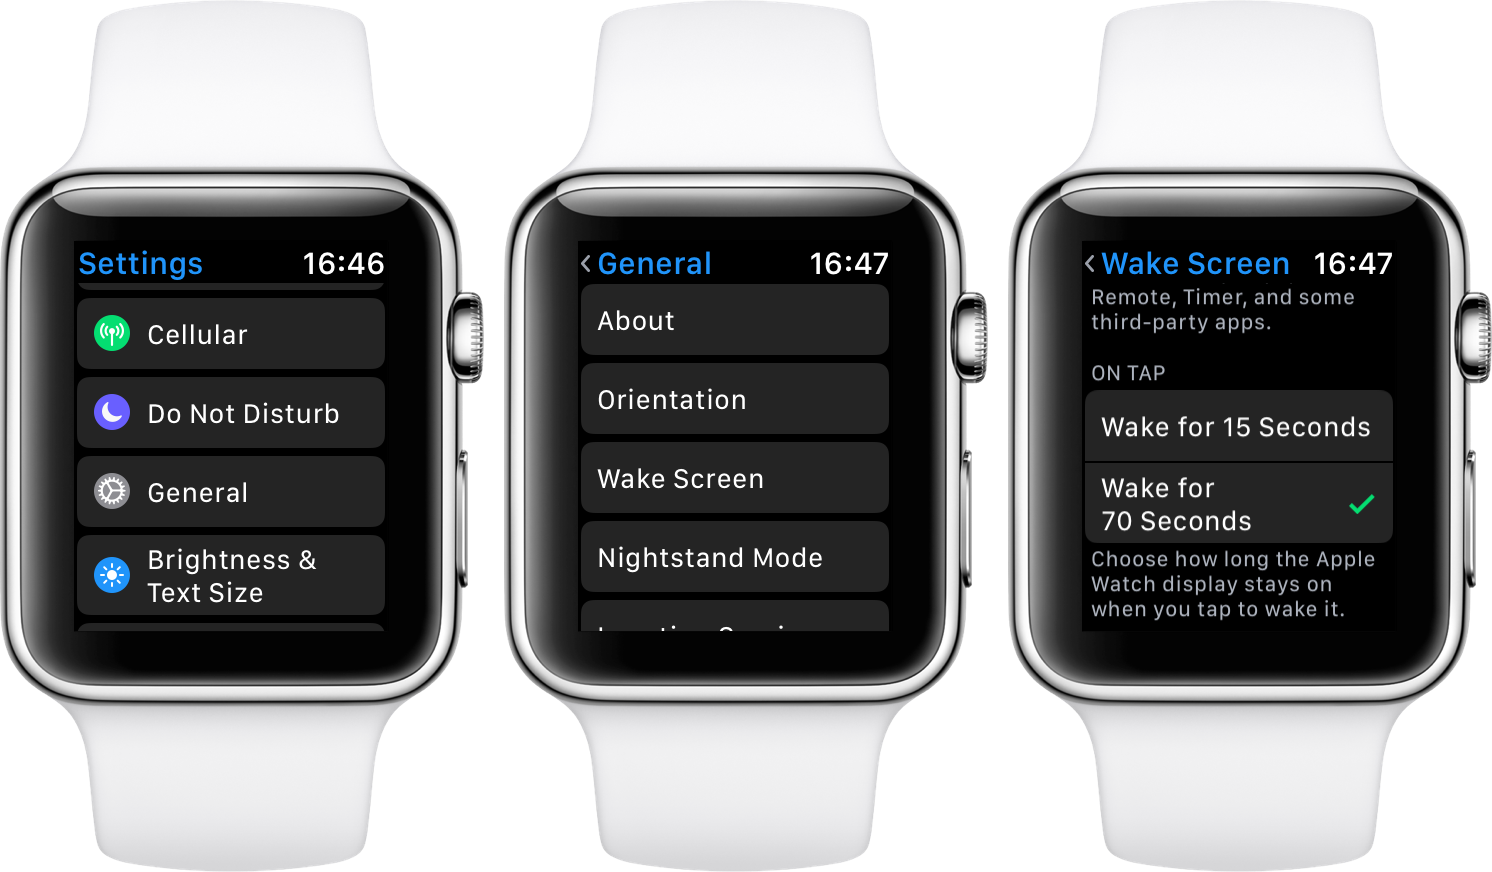 Apple Watch: How to keep the screen on longer - 9to5Mac